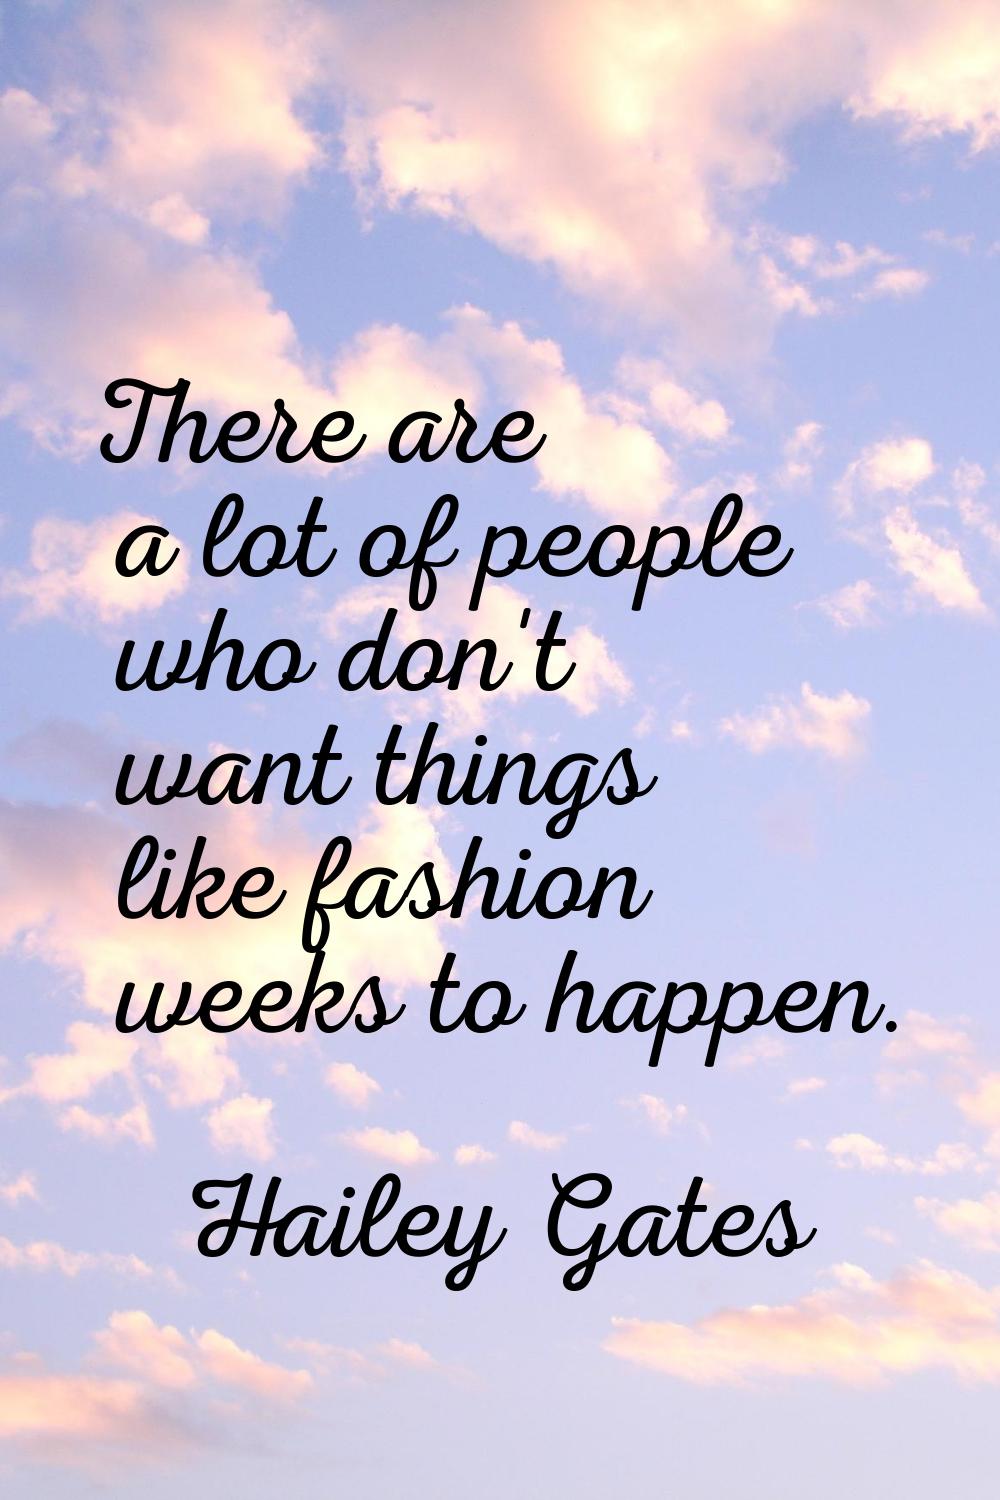 There are a lot of people who don't want things like fashion weeks to happen.